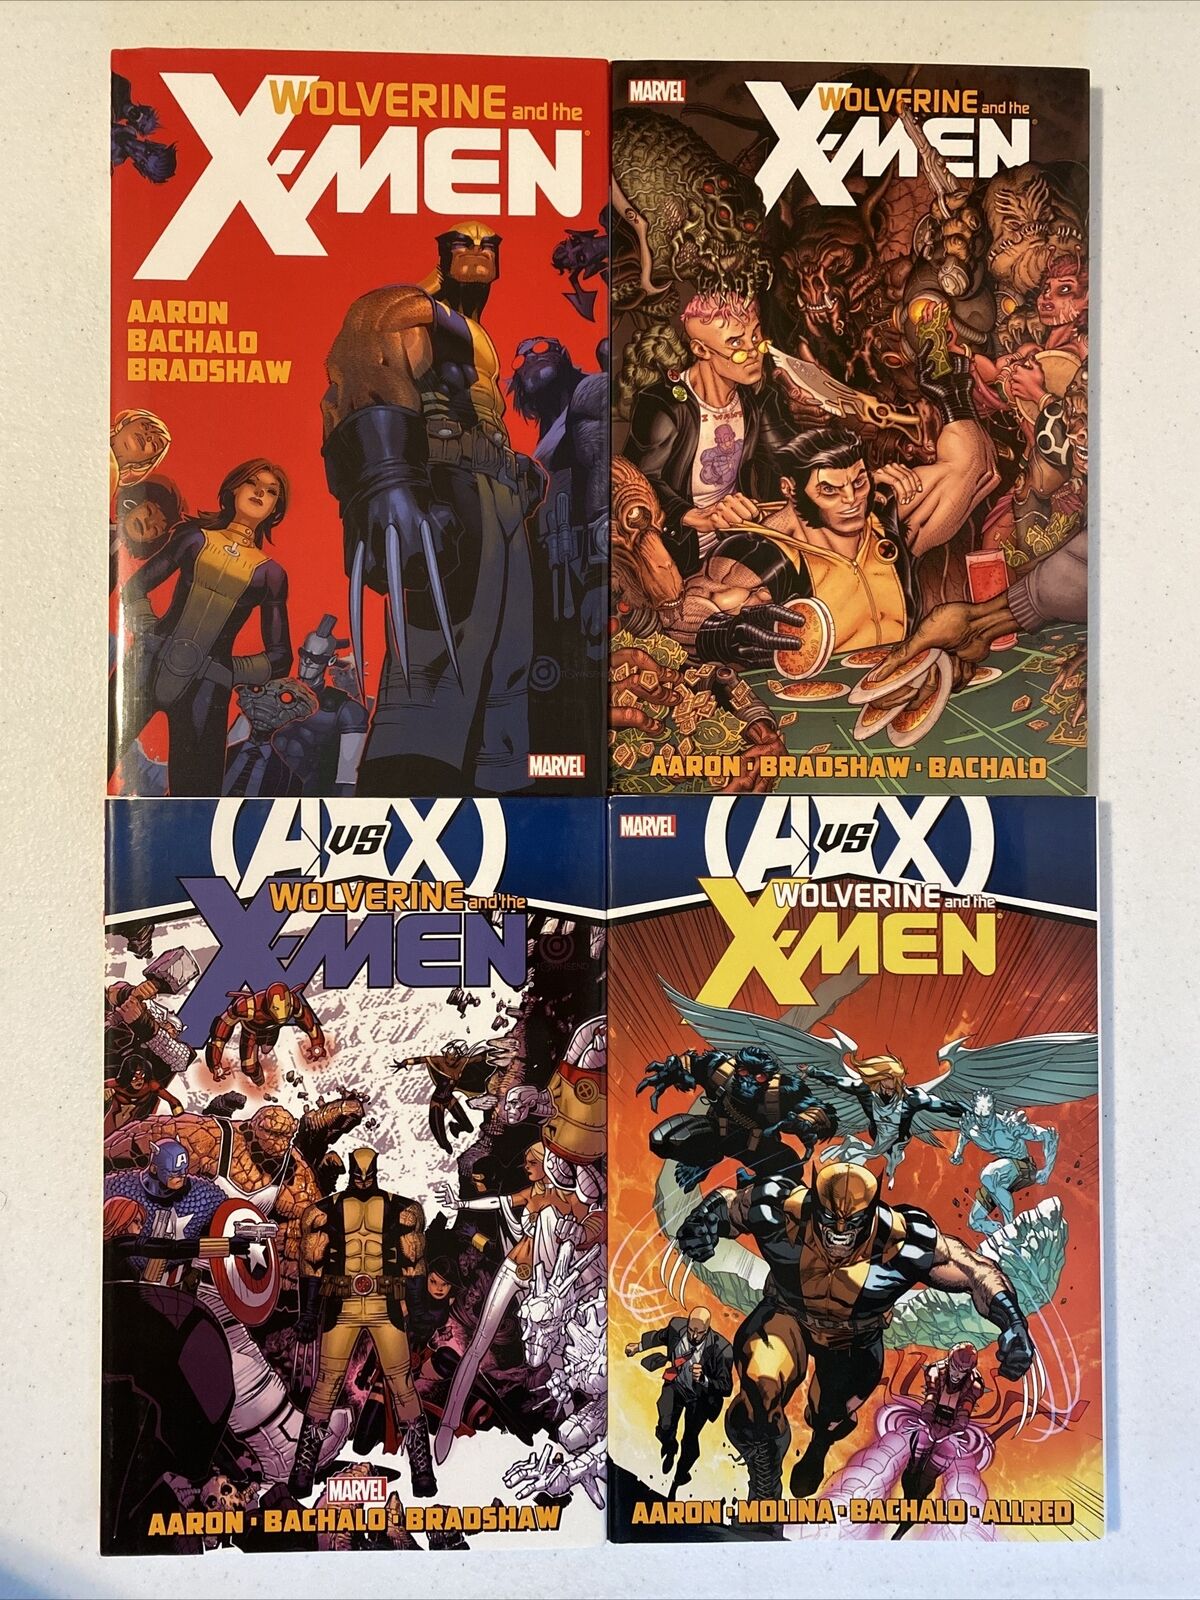 Wolverine and the X-Men Volume 1-2-3-4 (Hardcover, 2012) by Jason Aaron NM Cond.